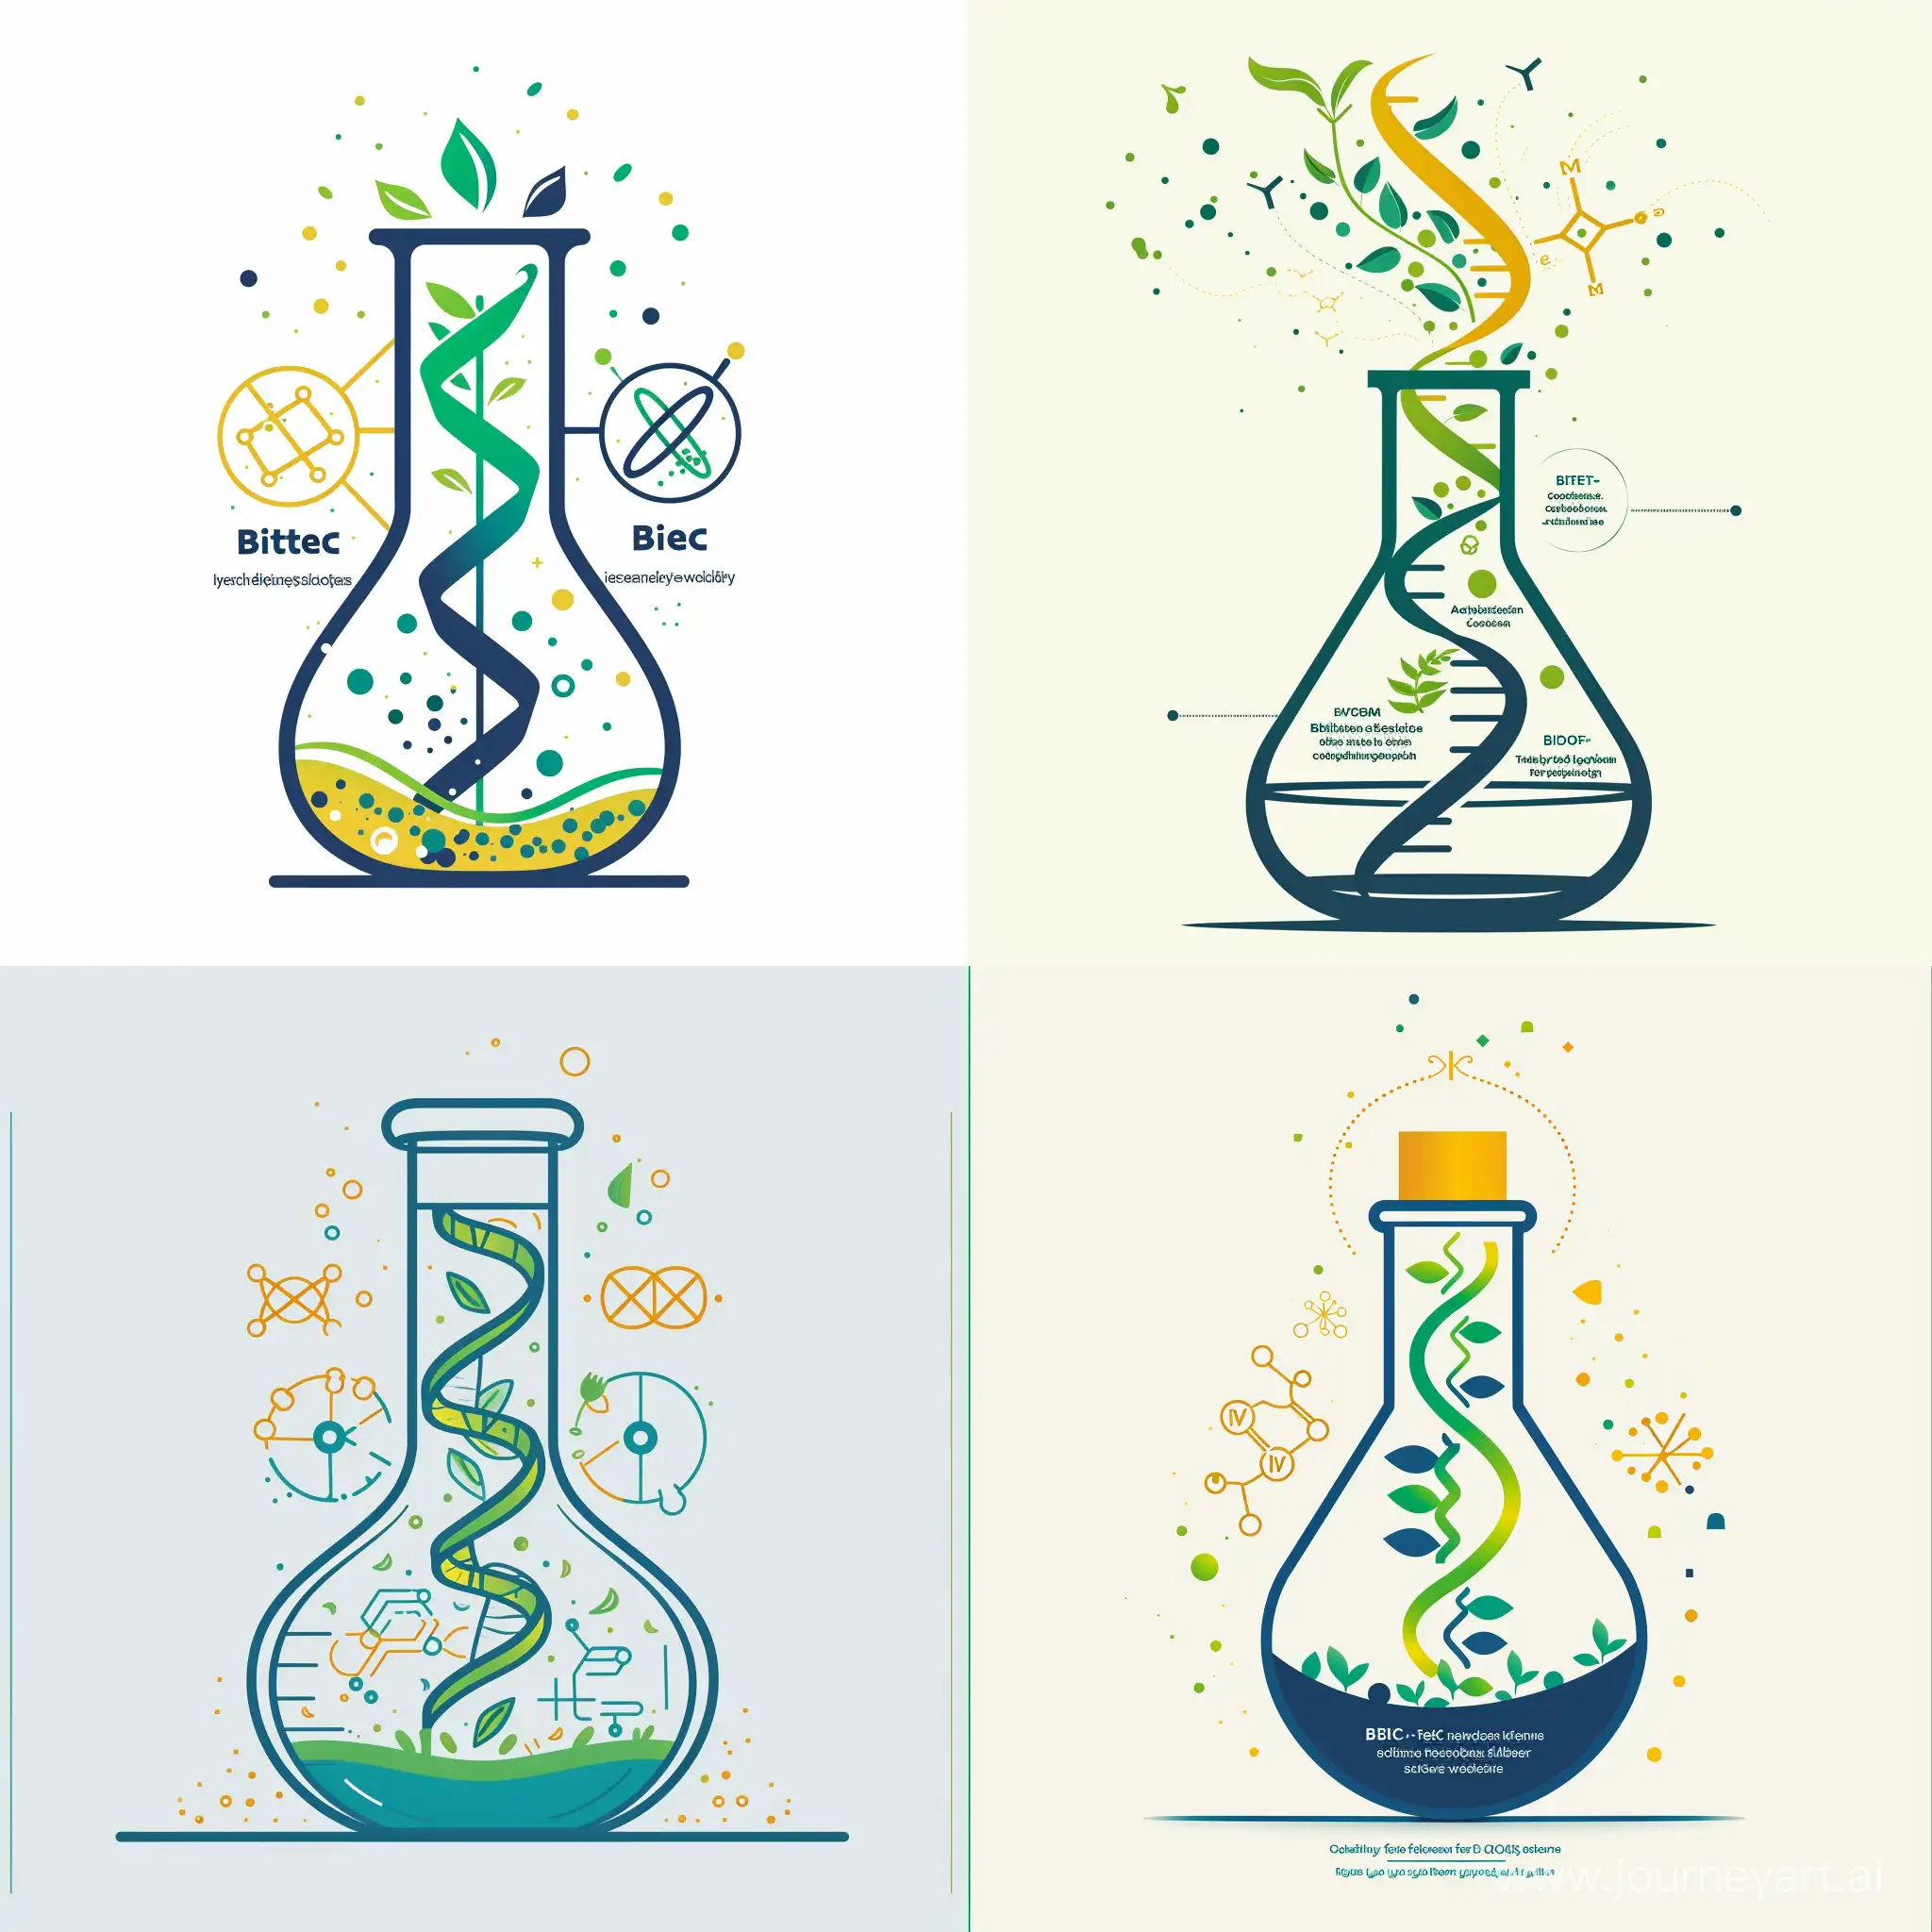 Concept 6: Biotech Growth:**

* **Image:** A glass beaker containing a stylized plant emerging from a double helix DNA strand. The plant reaches upwards, symbolizing growth and the power of biotechnology.
* **Colors:** Green (plants, growth), blue (clean energy, environment), and a vibrant accent color for the DNA strand (representing innovation).
* **Font:** Modern, yet organic typeface in English and Farsi.
* **Tagline (optional):** "Biotech for a Greener Future" (in English and Farsi)

**Concept 7: Sustainable Alchemy:**

* **Image:** A stylized Erlenmeyer flask with a circular flow inside. The flow incorporates plant elements and energy symbols, depicting the transformative power of biotechnology.
* **Colors:** Green (plants), blue (clean air, sky), and yellow (clean energy).
* **Font:** Clean, minimalist sans-serif typeface in English and Farsi.
* **Tagline (optional):** "Biologically Inspired Solutions for a Sustainable World" (in English and Farsi)